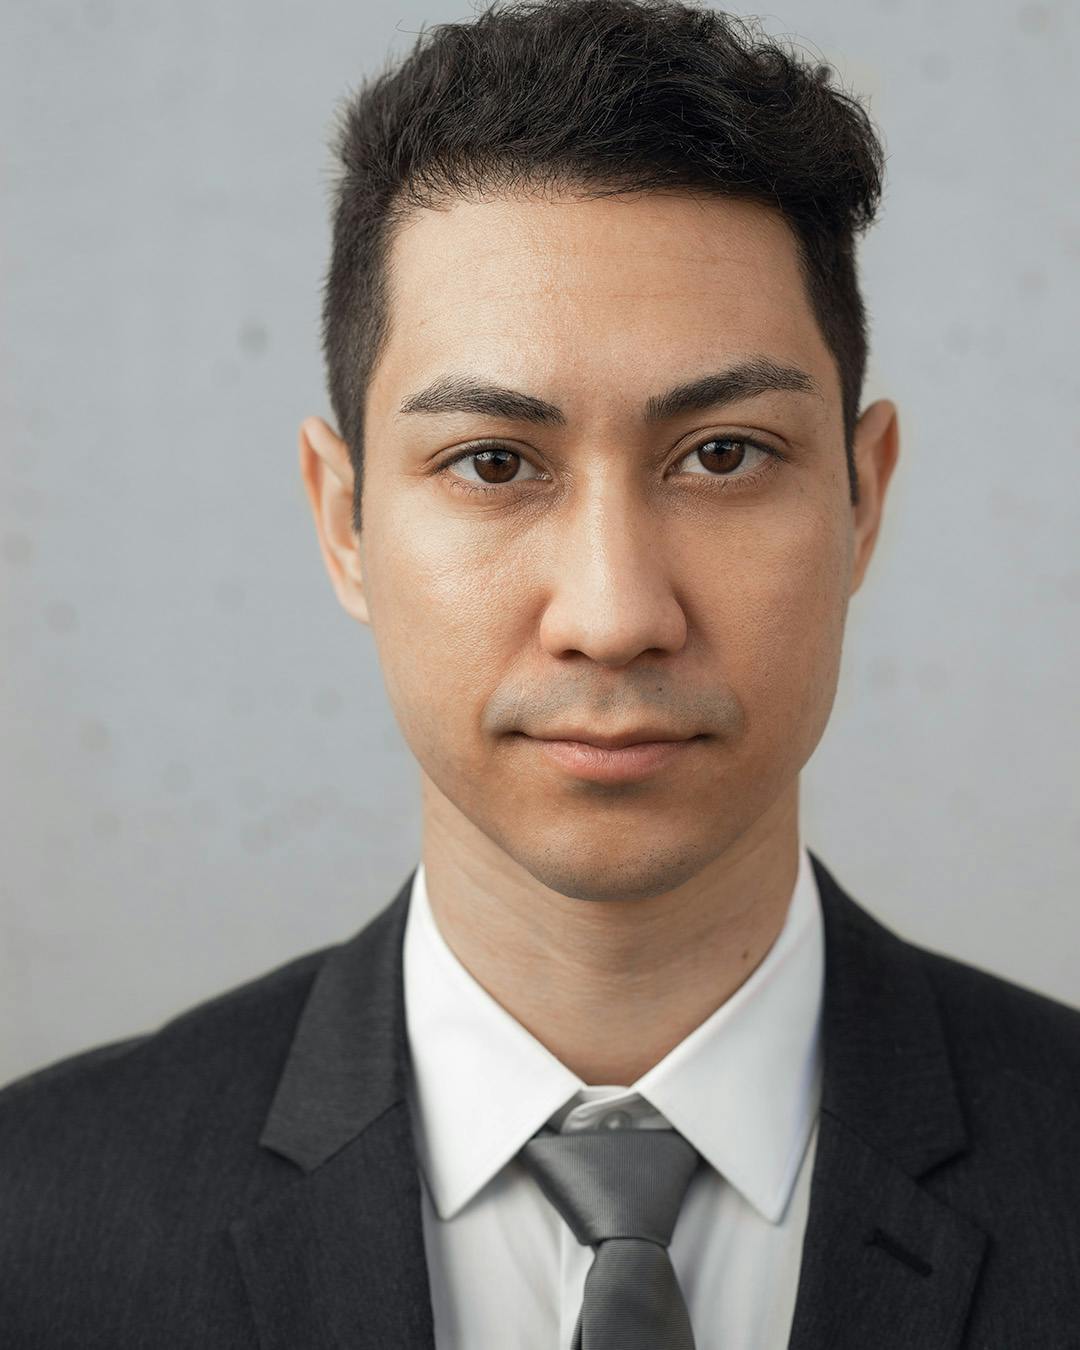 Man wearing solid black color suit for his headshot.